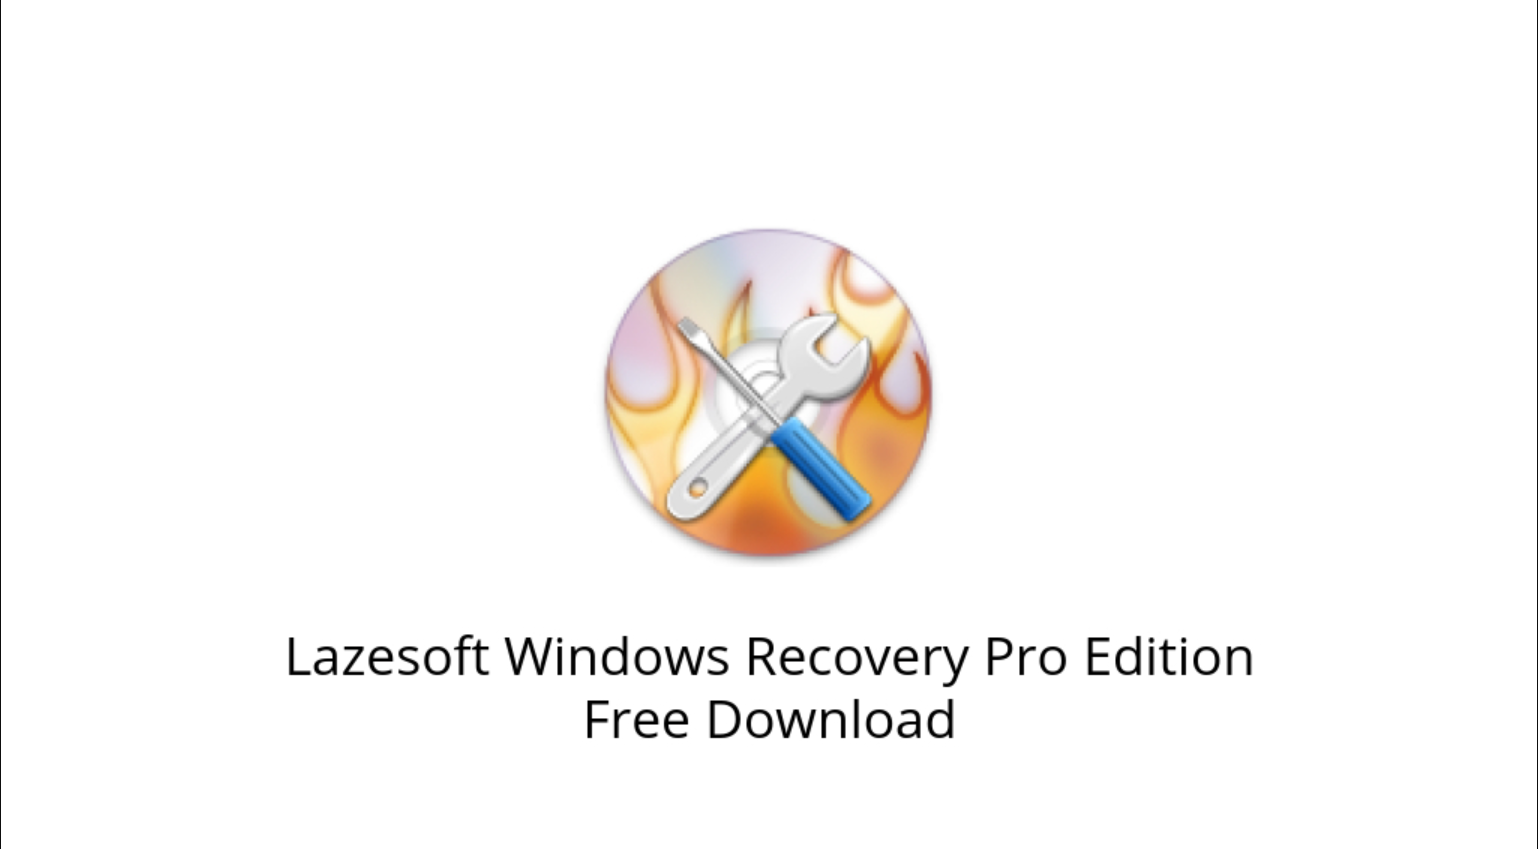 "Image: Lasersoft Windows Recovery Pro Edition logo. Download for free. Additional info: Lazesoft Windows Recovery crack."